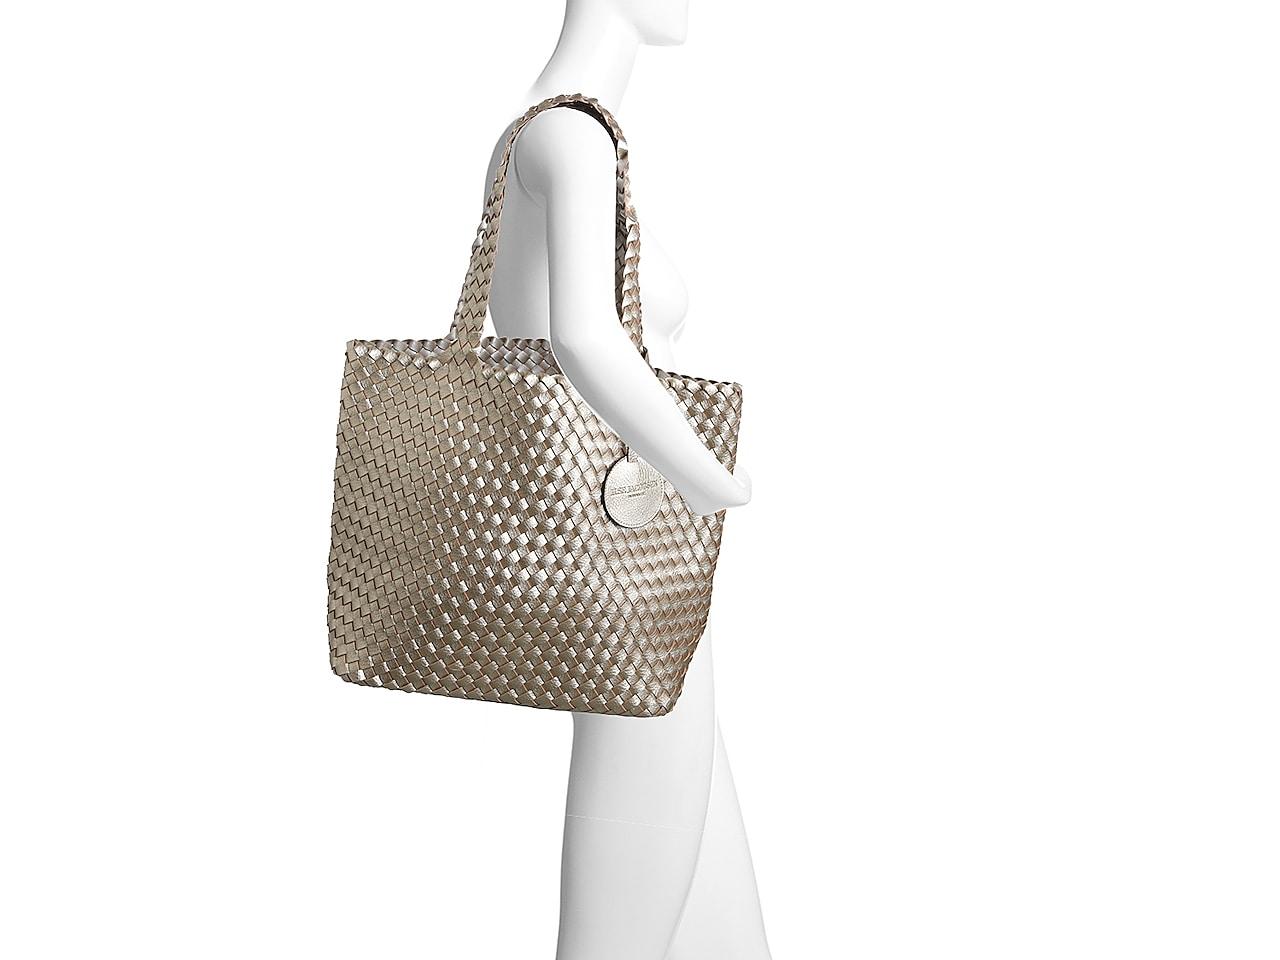 Ilse Jacobsen Leather Bag 08 Tote | Lyst